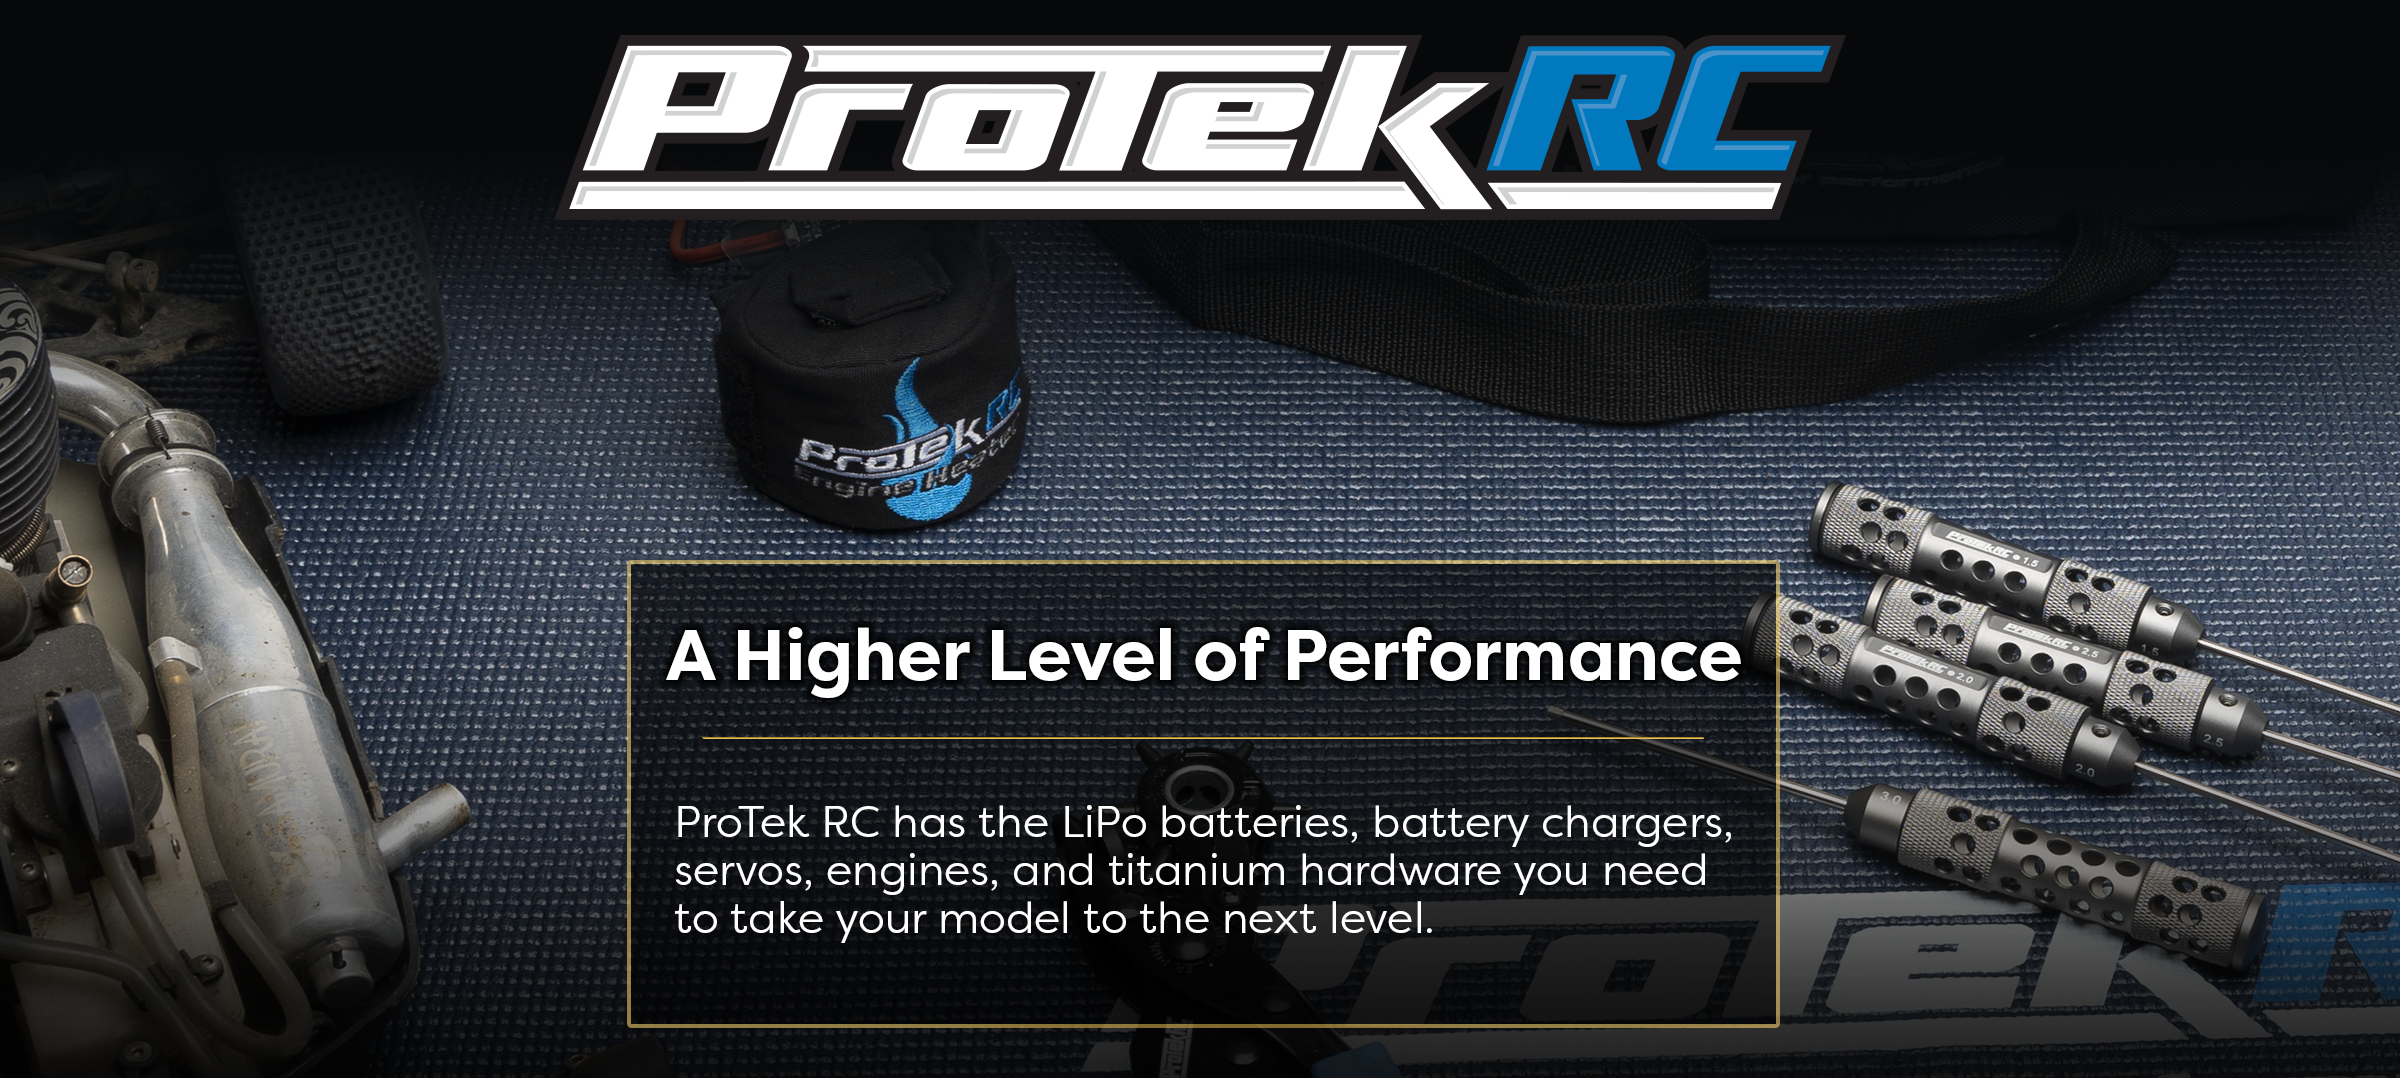 ProTek RC has the LiPo batteries, battery chargers, servos, engines, and titanium hardware you need to take your model to the next level.